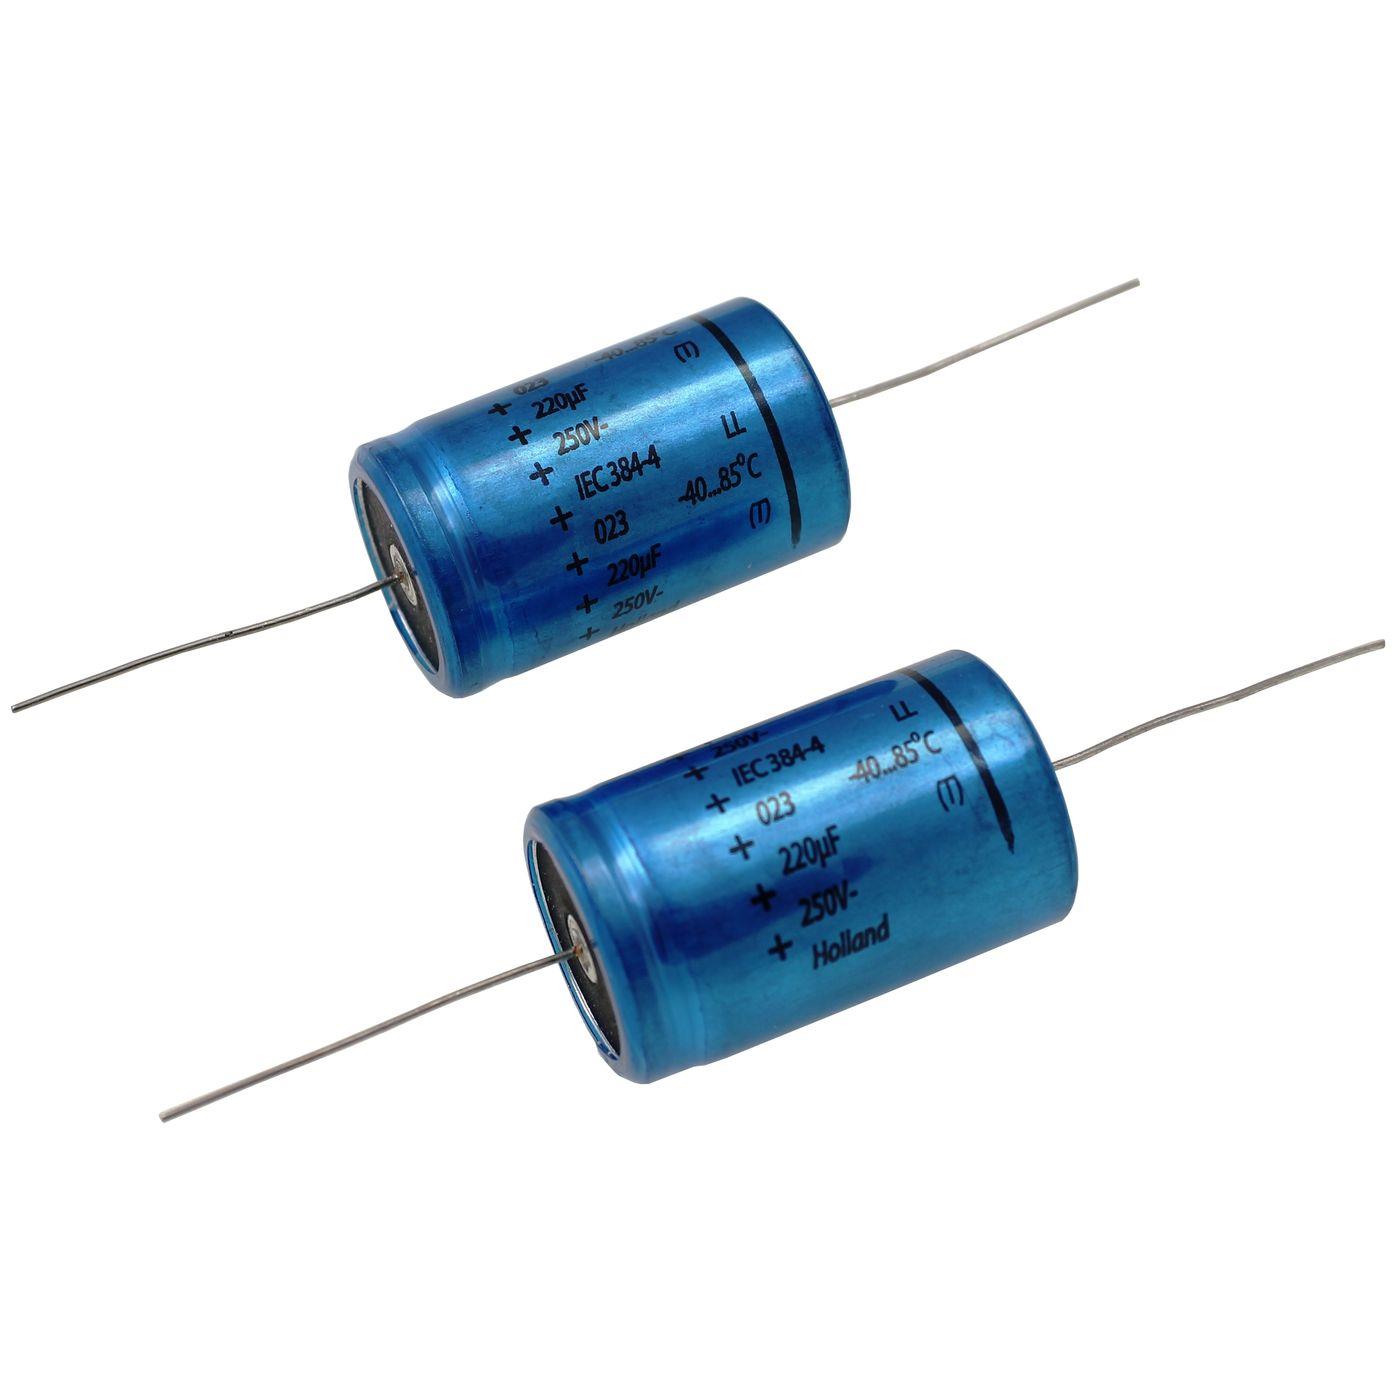 Electrolytic capacitor Axially 220µF 250V 85°C 222202313221 220uF